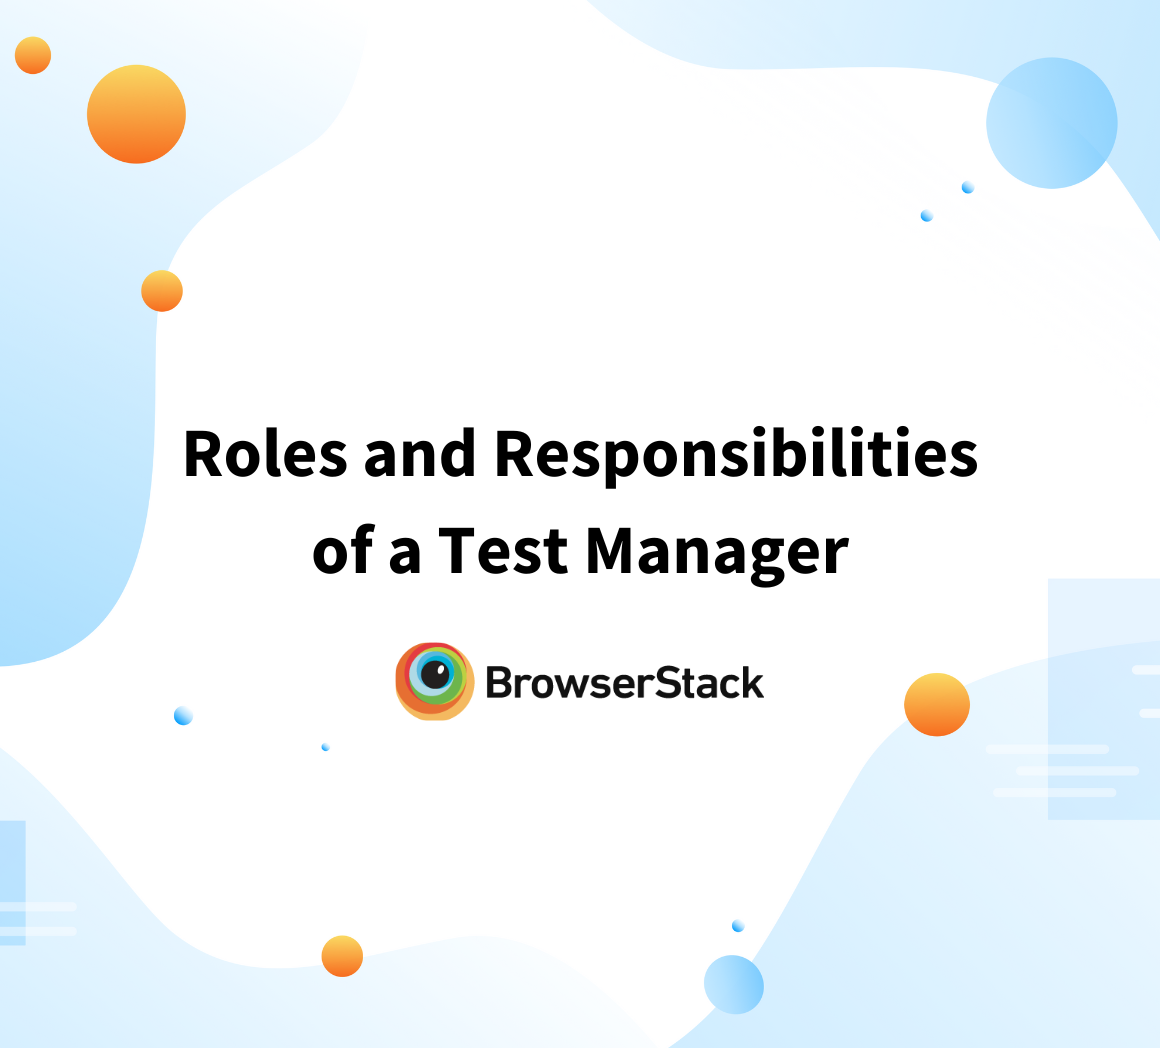 Roles and Responsibilities of a Test Manager